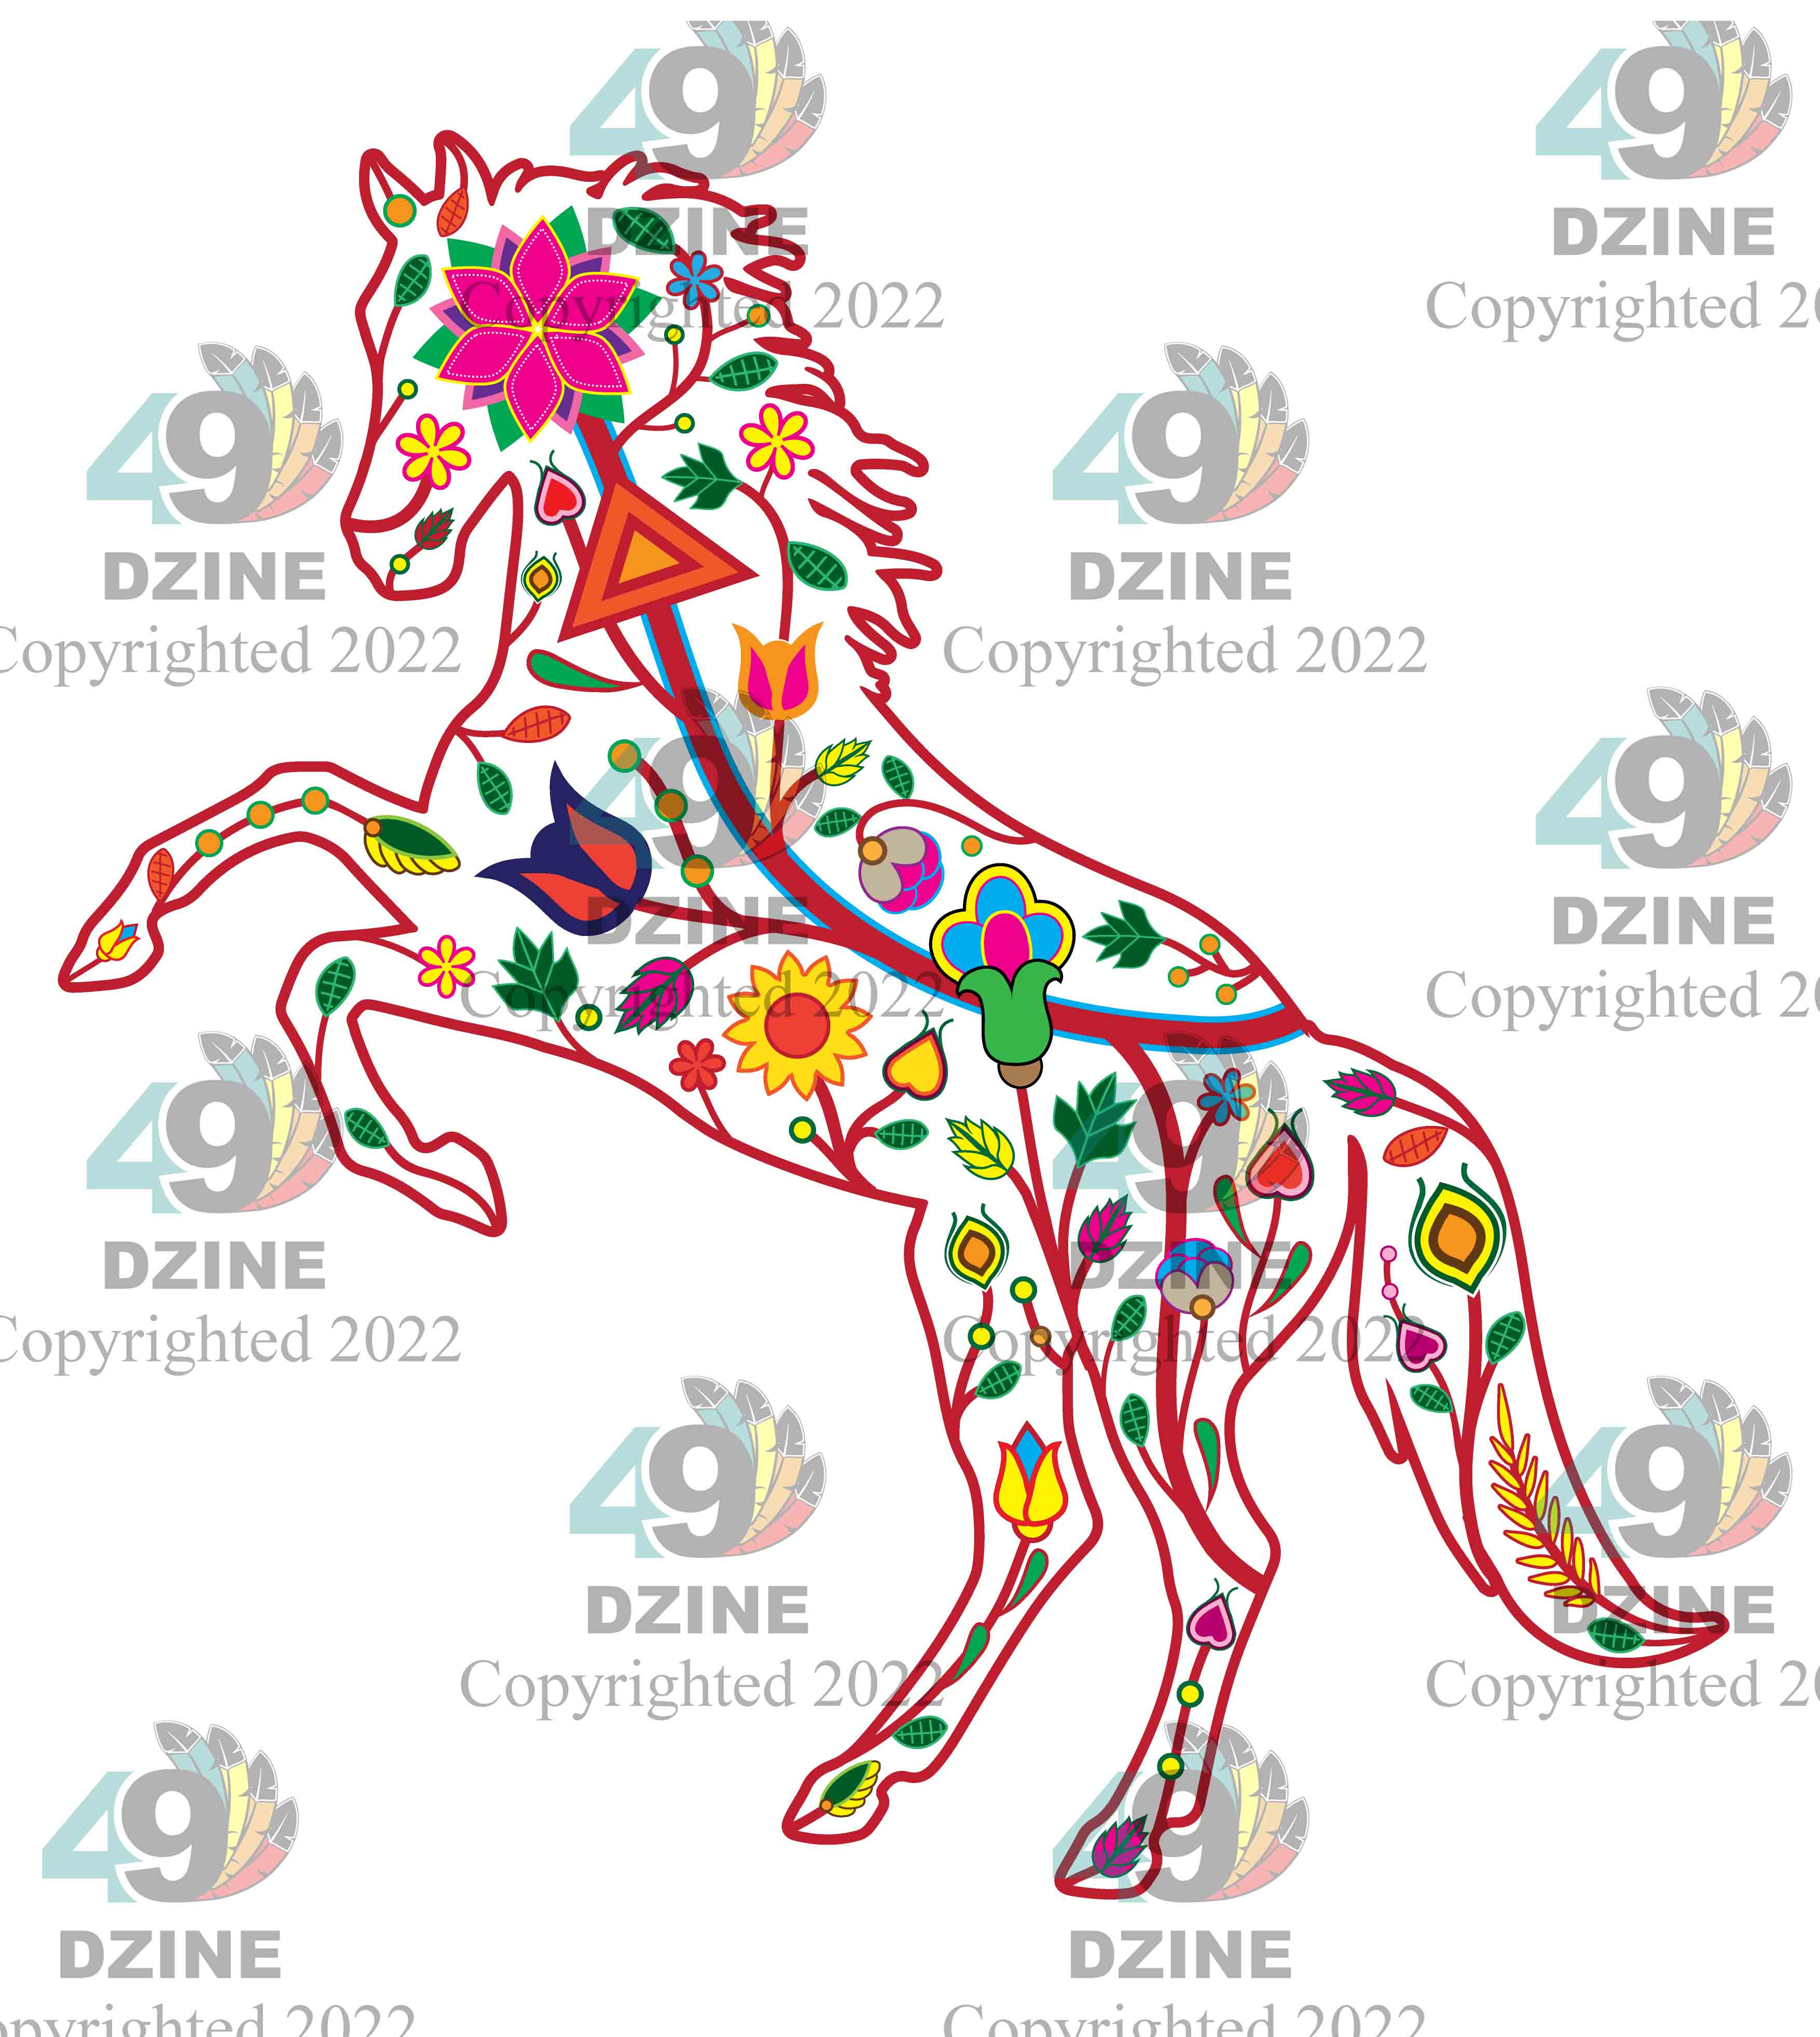 11-inch Animal Floral Transfer Transfers 49 Dzine Floral Horse 